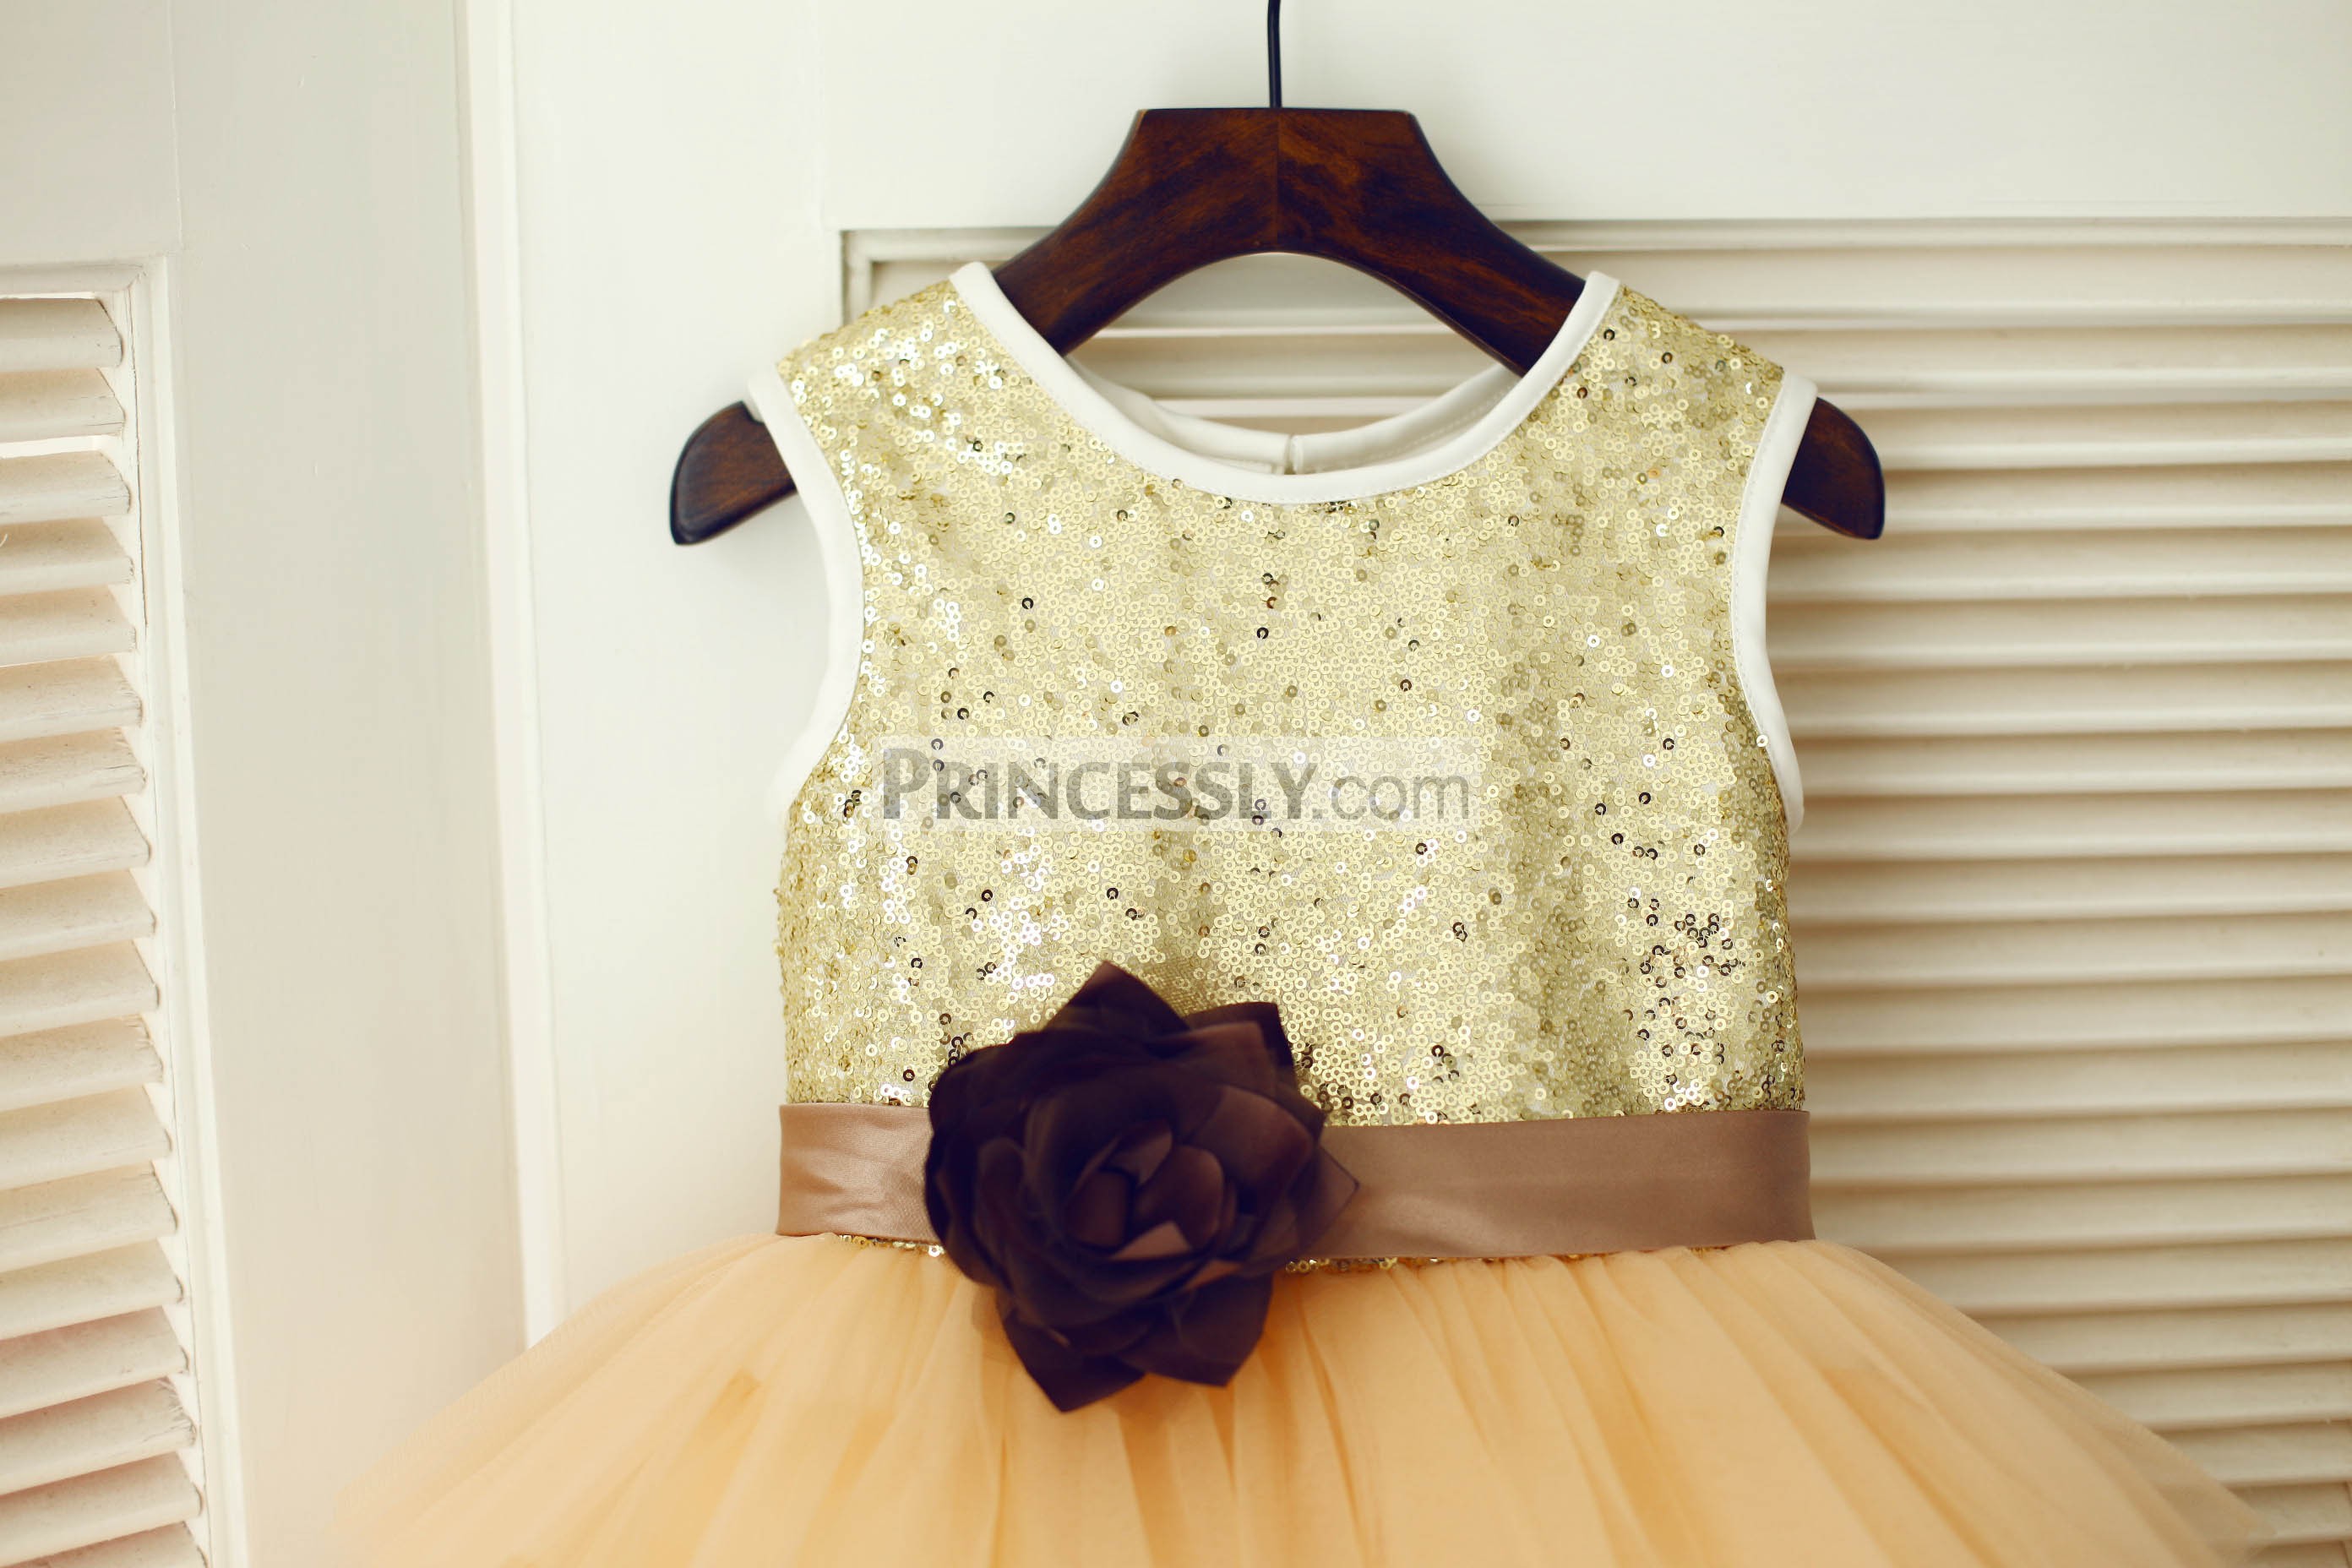 Blooming flower sash of gold sequin bodice